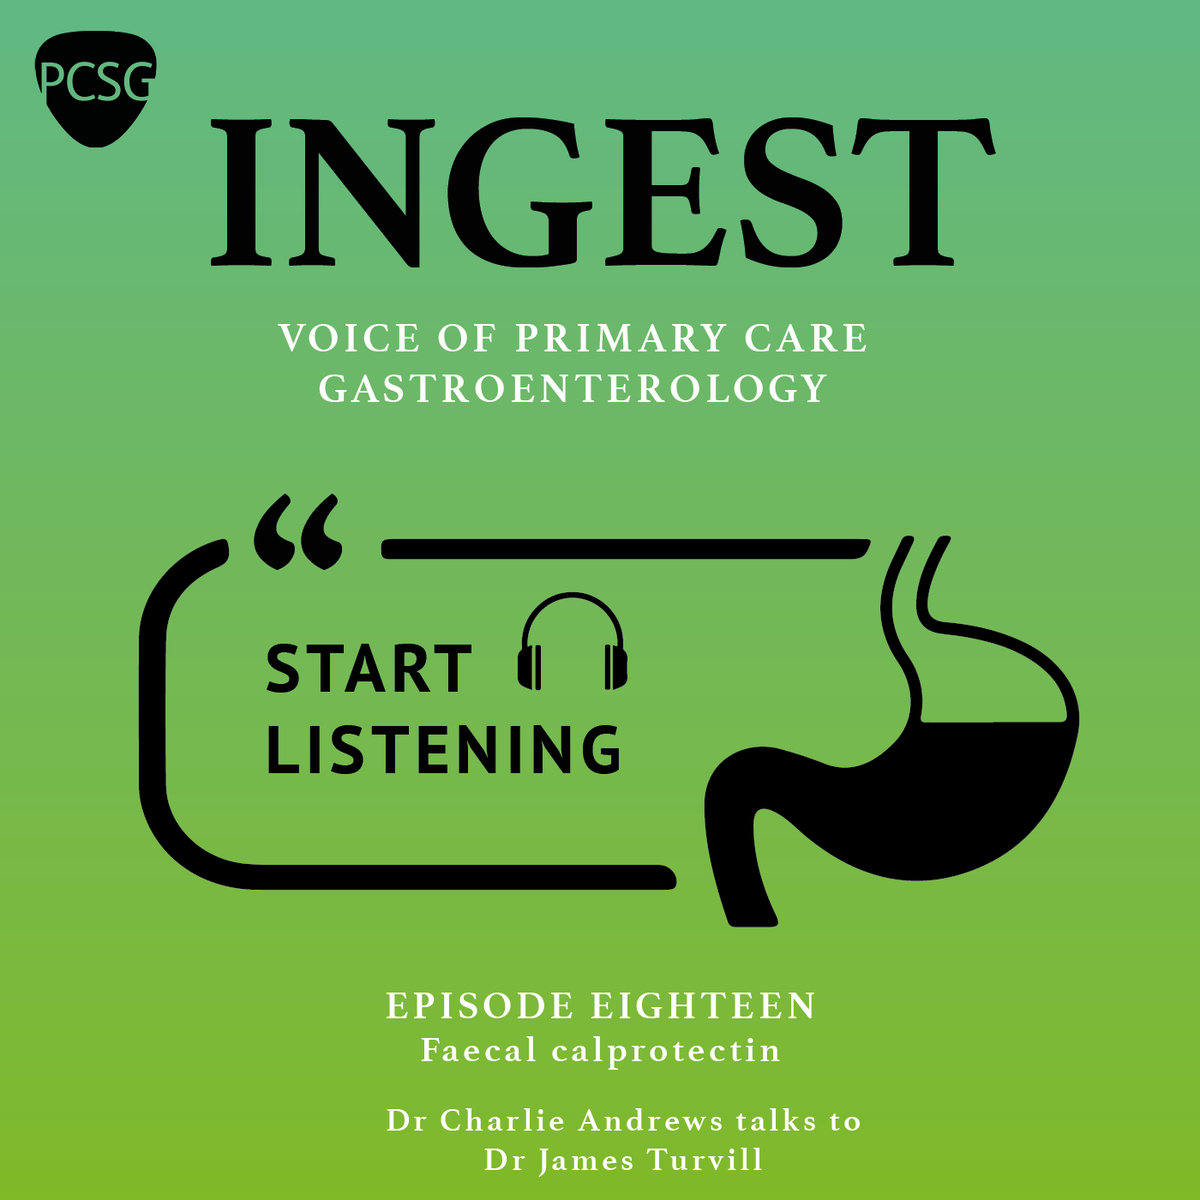 Episode 18 of Ingest out now. In this episode, Charlie Andrews speaks to Dr James Turvill about faecal calprotectin use in primary care. pcsg.org.uk/podcast/faecal… or all main podcast platforms.